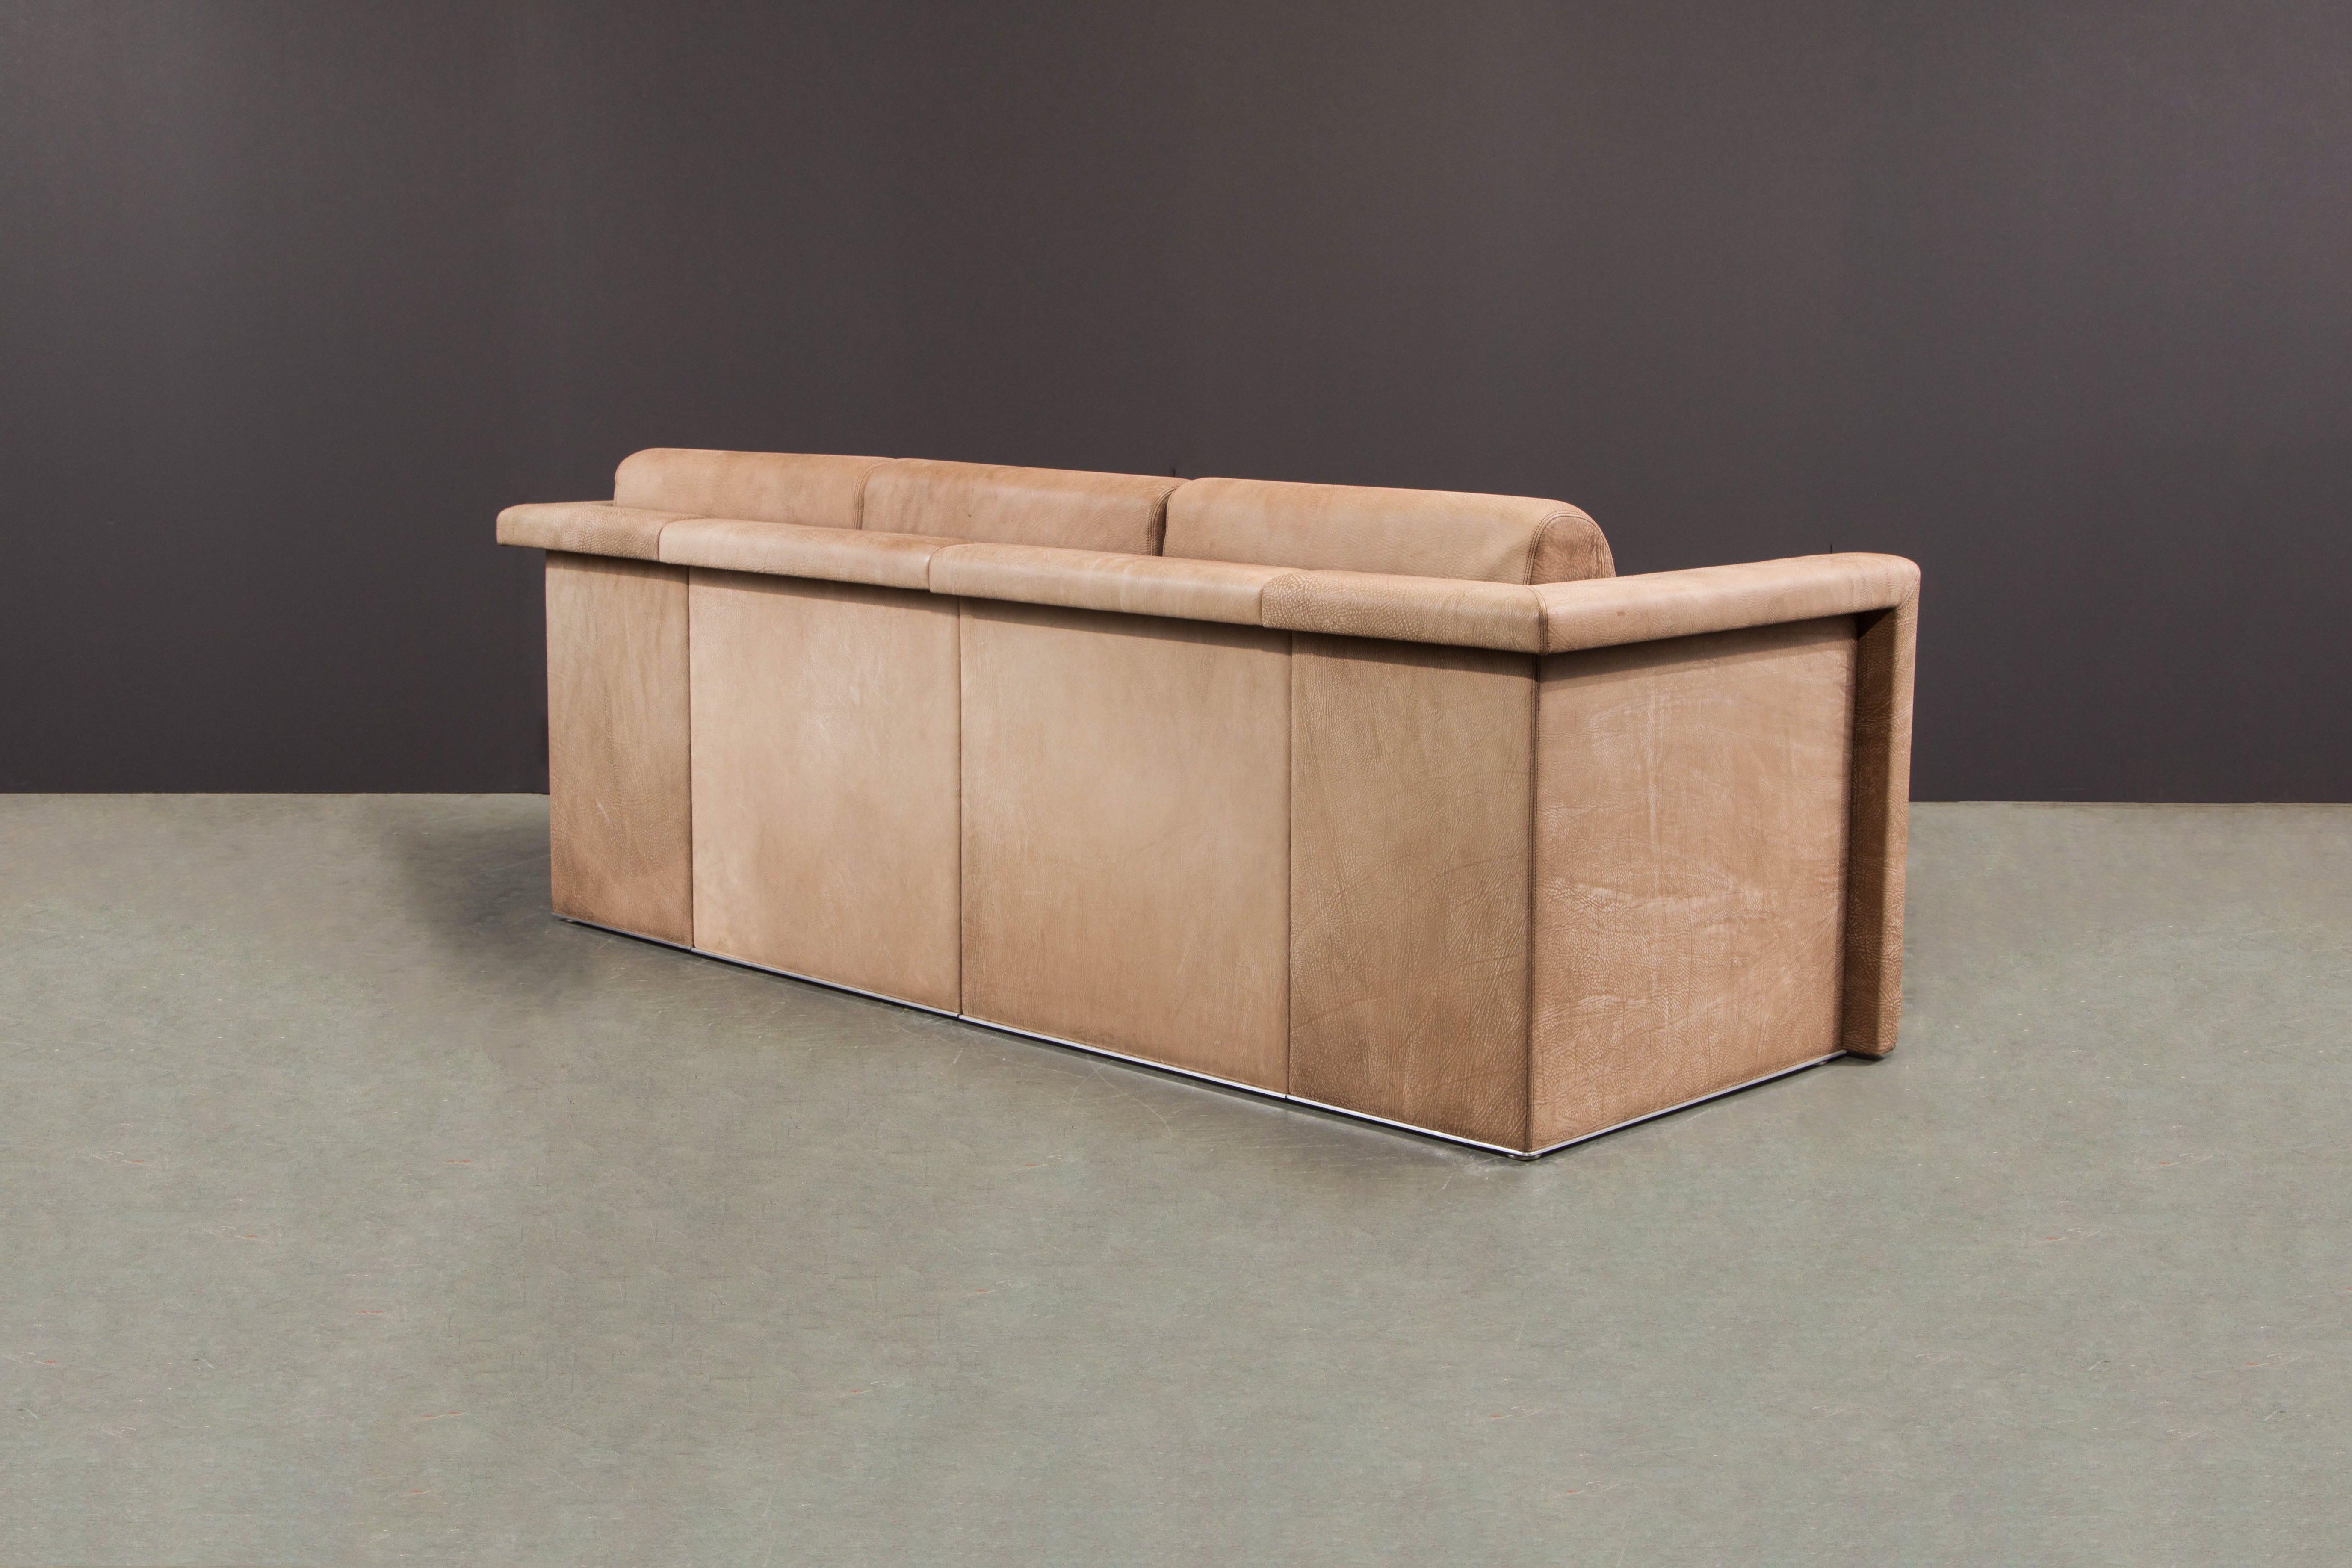 Aluminum Buffalo Leather Sofa by Robert and Trix Haussmann for Knoll, c. 1988, Signed For Sale